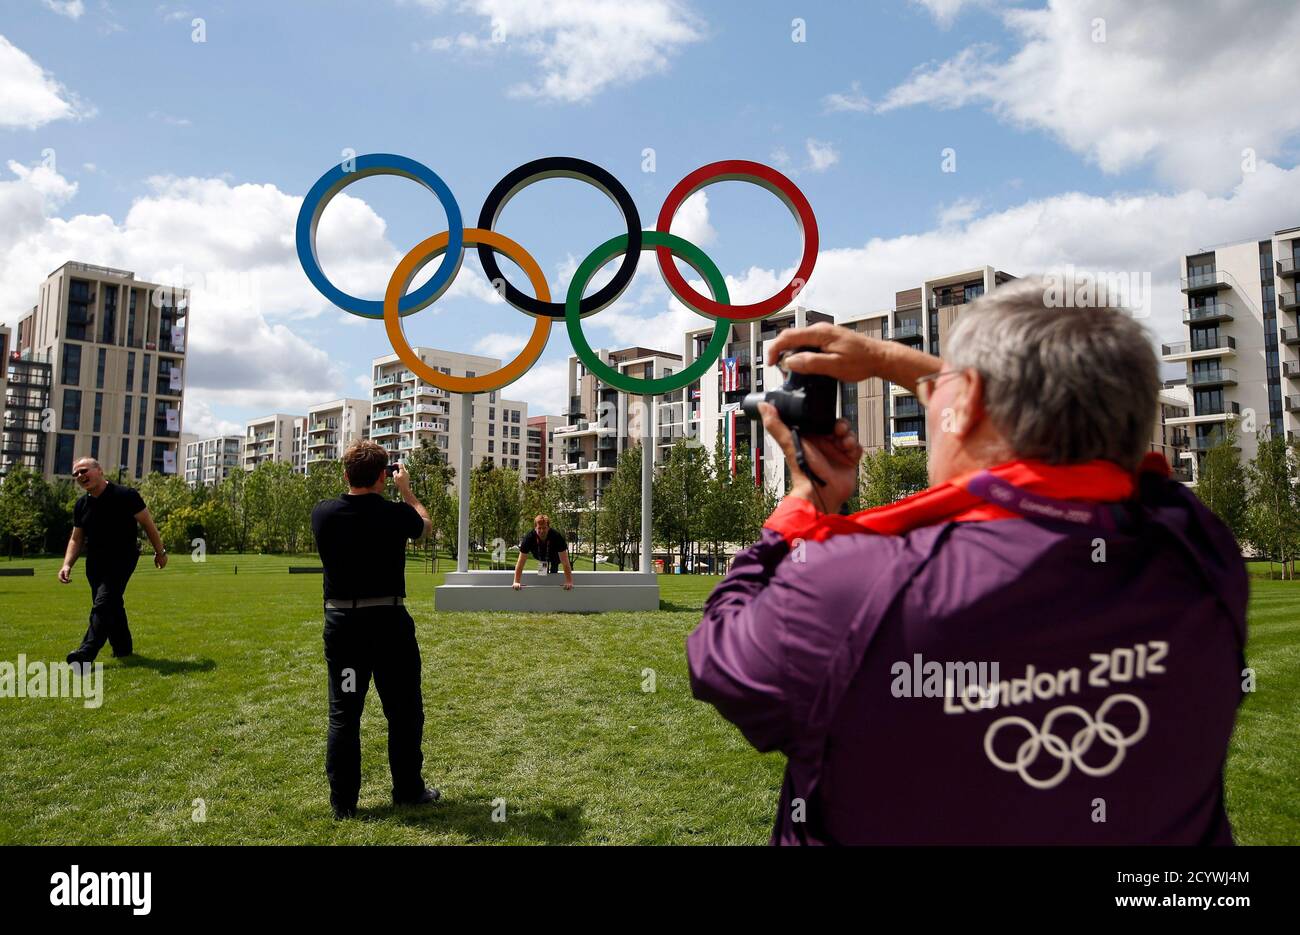 A volunteer takes a photograph of the Olympic rings at the Athletes' Village at the Olympic Park in London, July 19, 2012.  REUTERS/Jae C. Hong/Pool (BRITAIN - Tags: SPORT OLYMPICS) Stock Photo